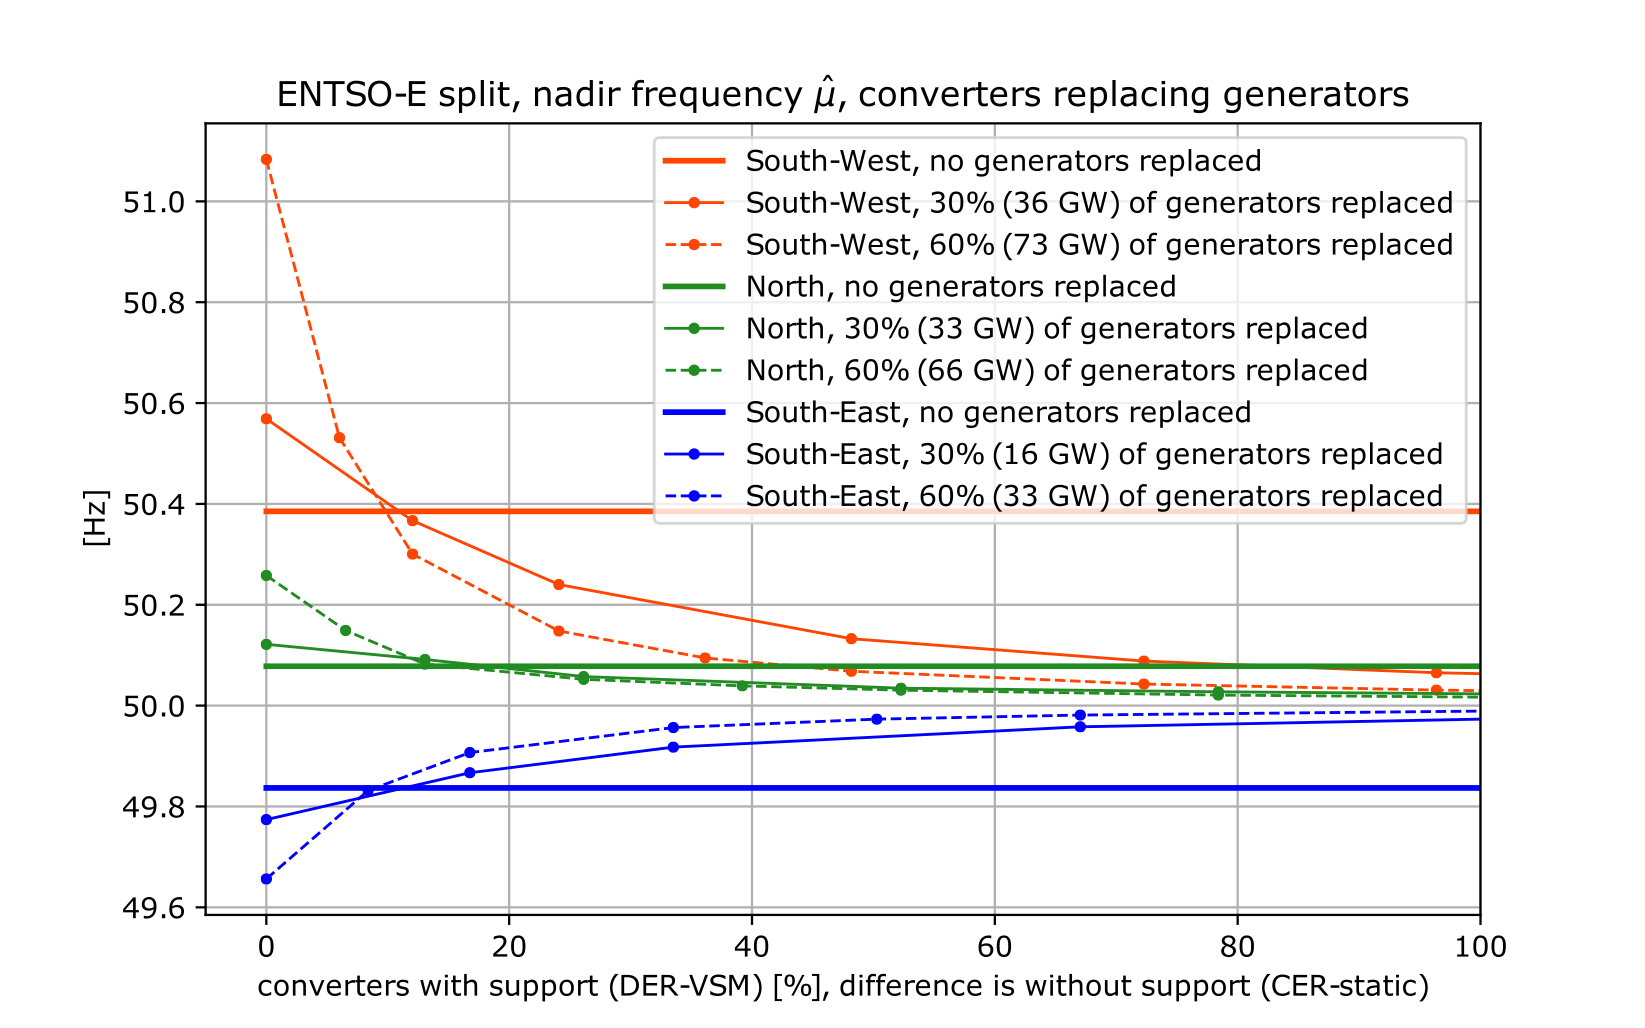 Frequency nadir for three shares of synchronous generation replaced by new converters (bold, thin, dashed line) and three regions (colors).